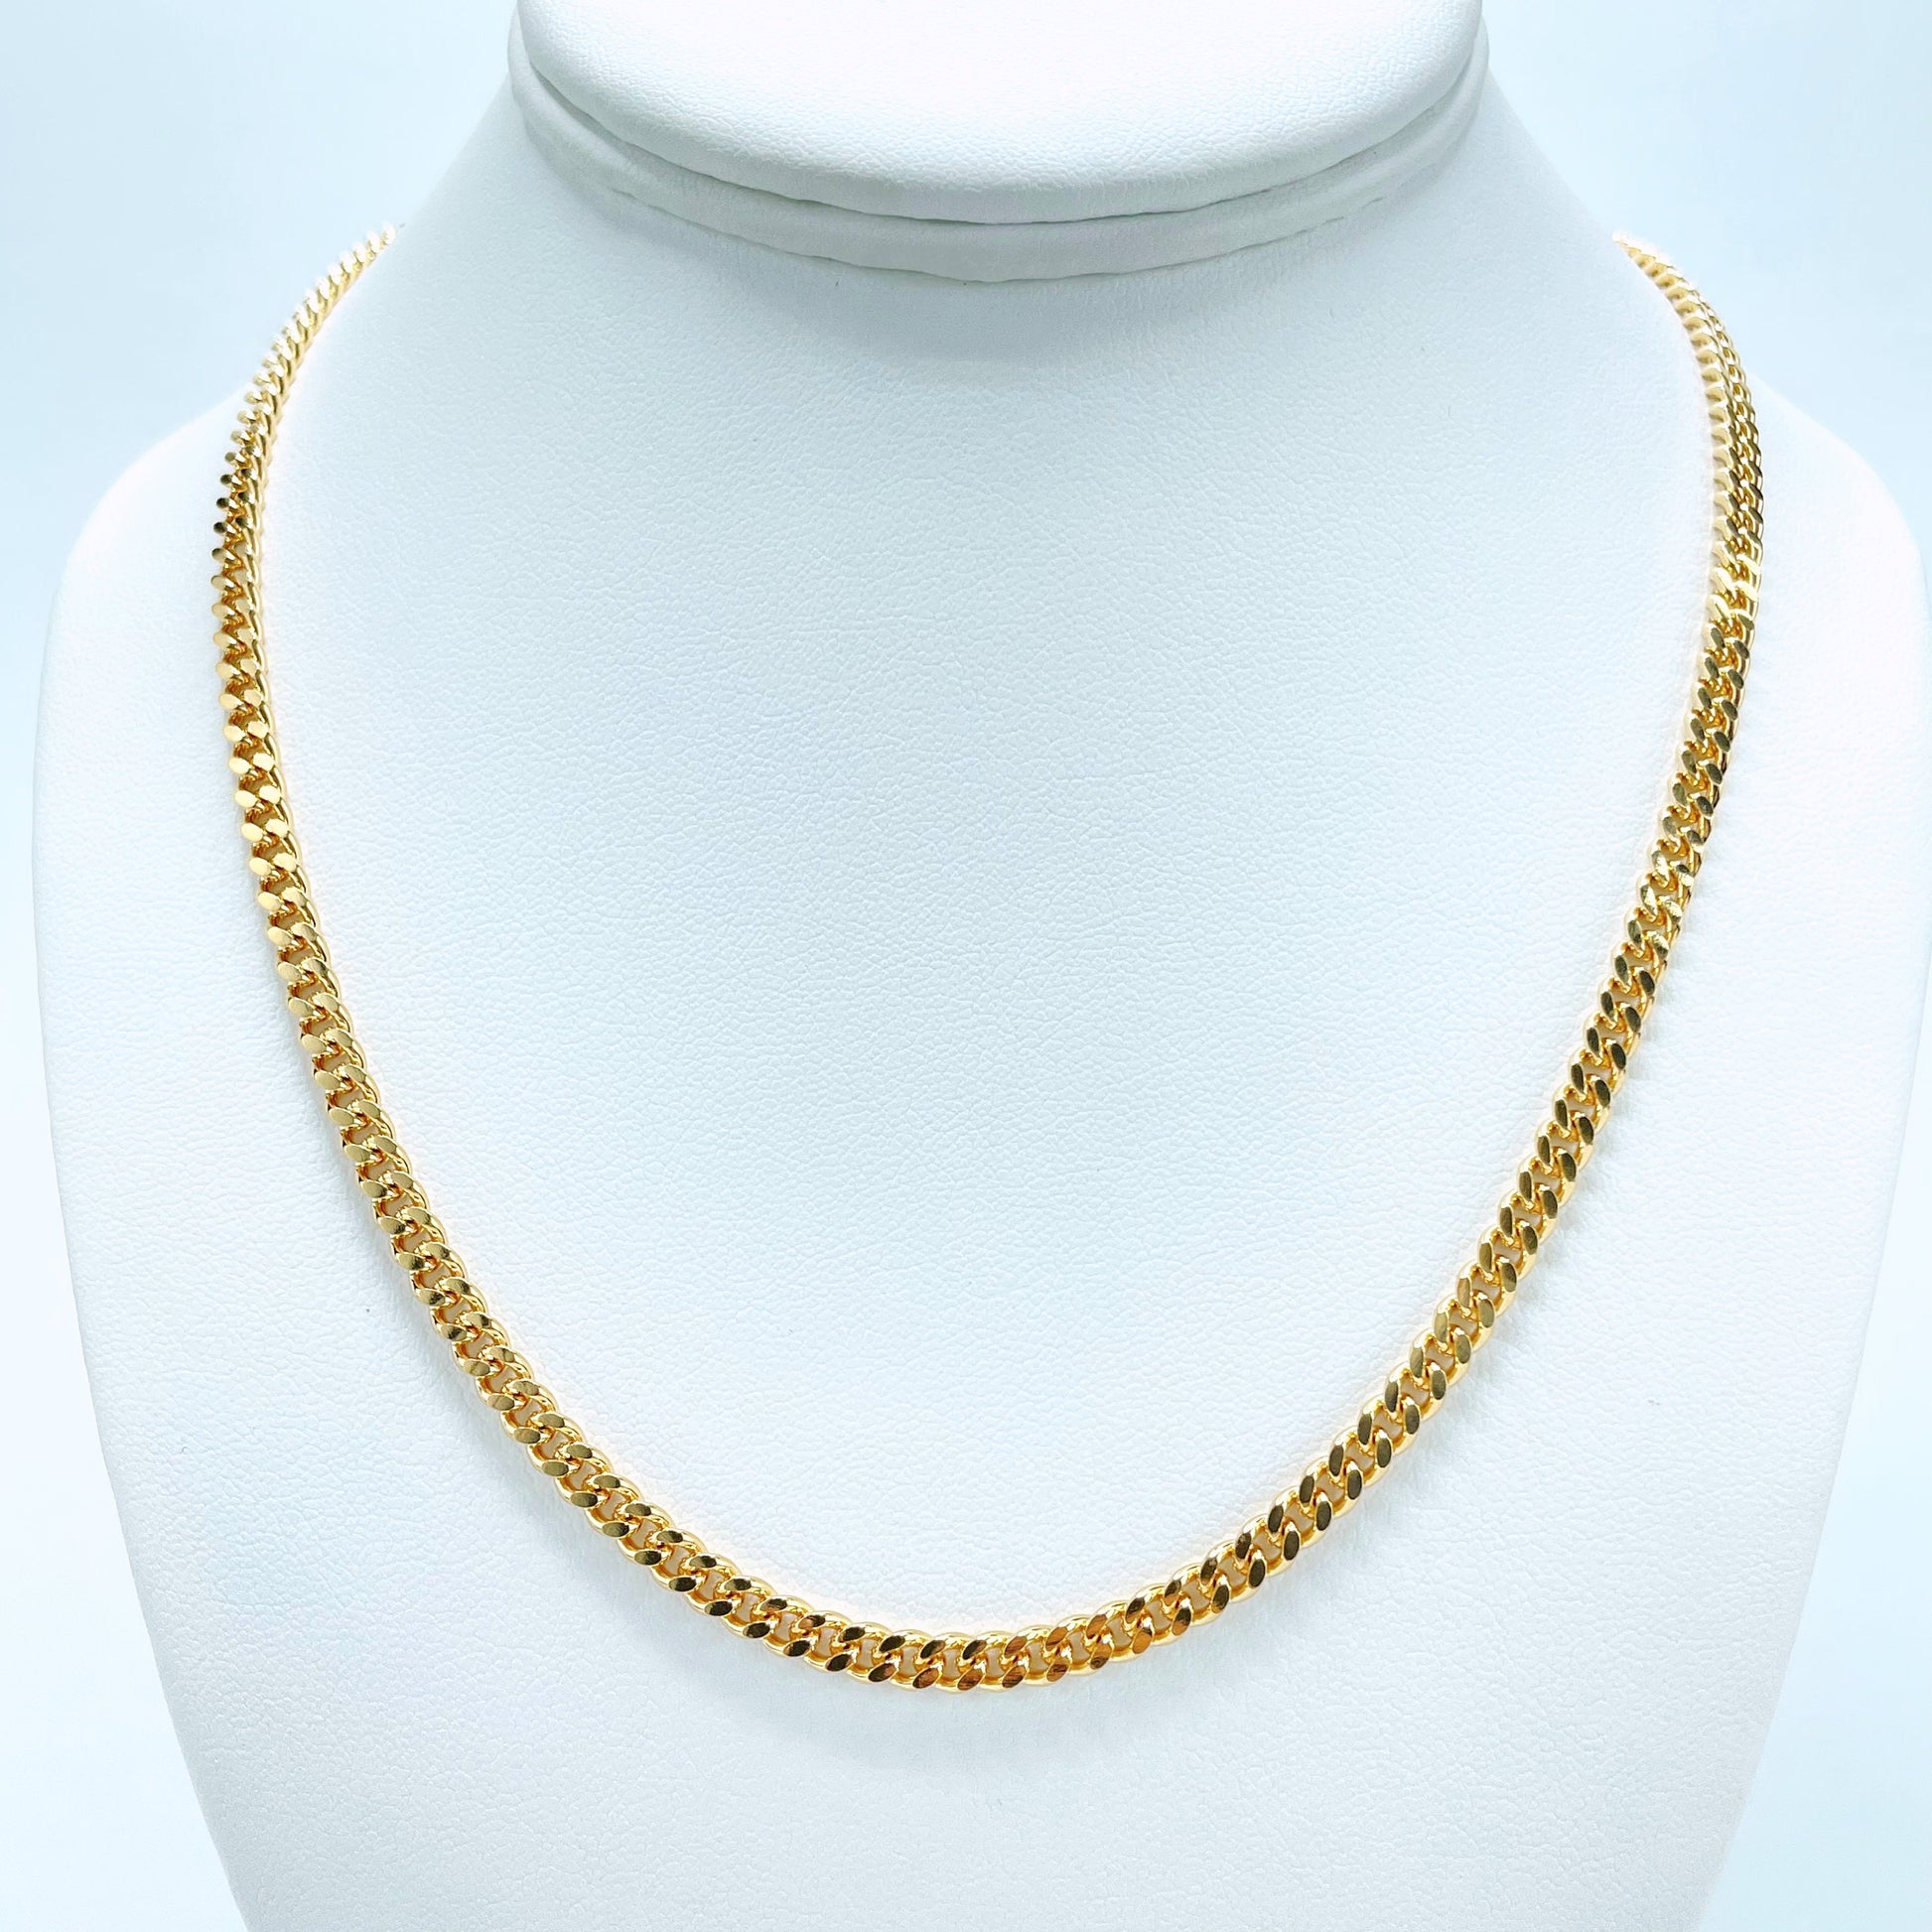 18k Gold Filled Miami Cuban Link Chain 4mm Thickness, Unisex Curb Link Chain, Wholesale Jewelry Making Supplies